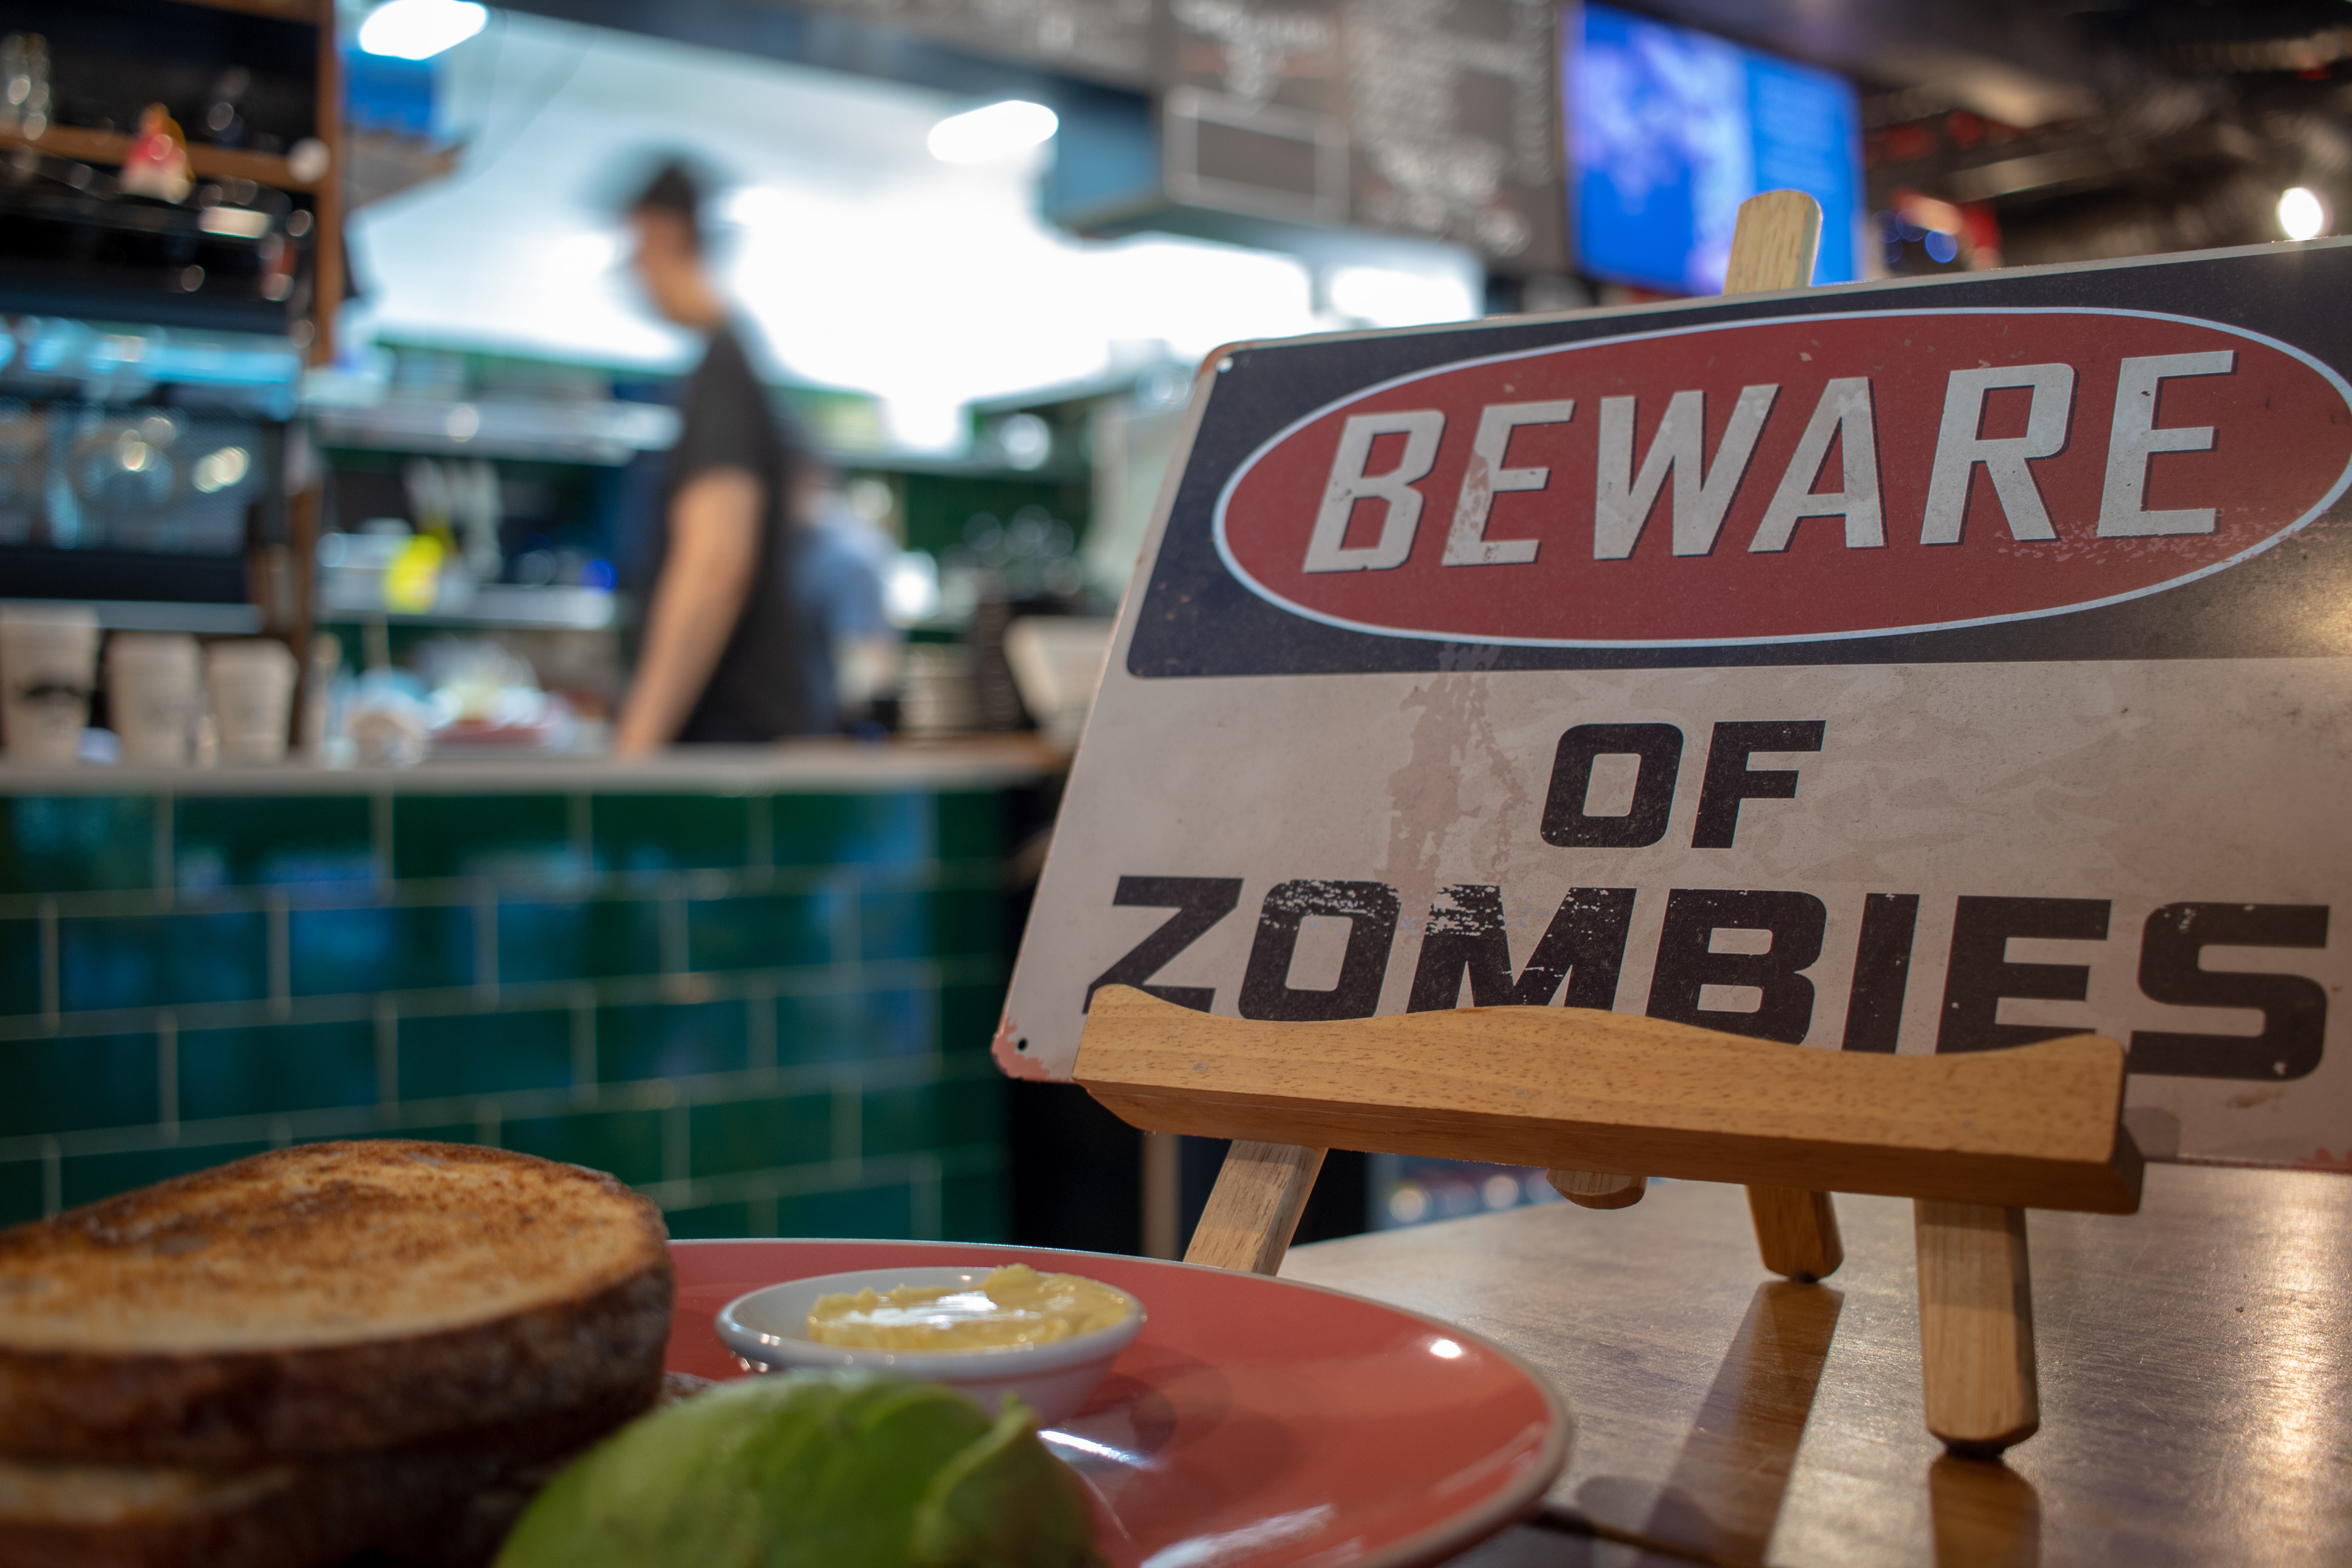 Beware of Zombies sign